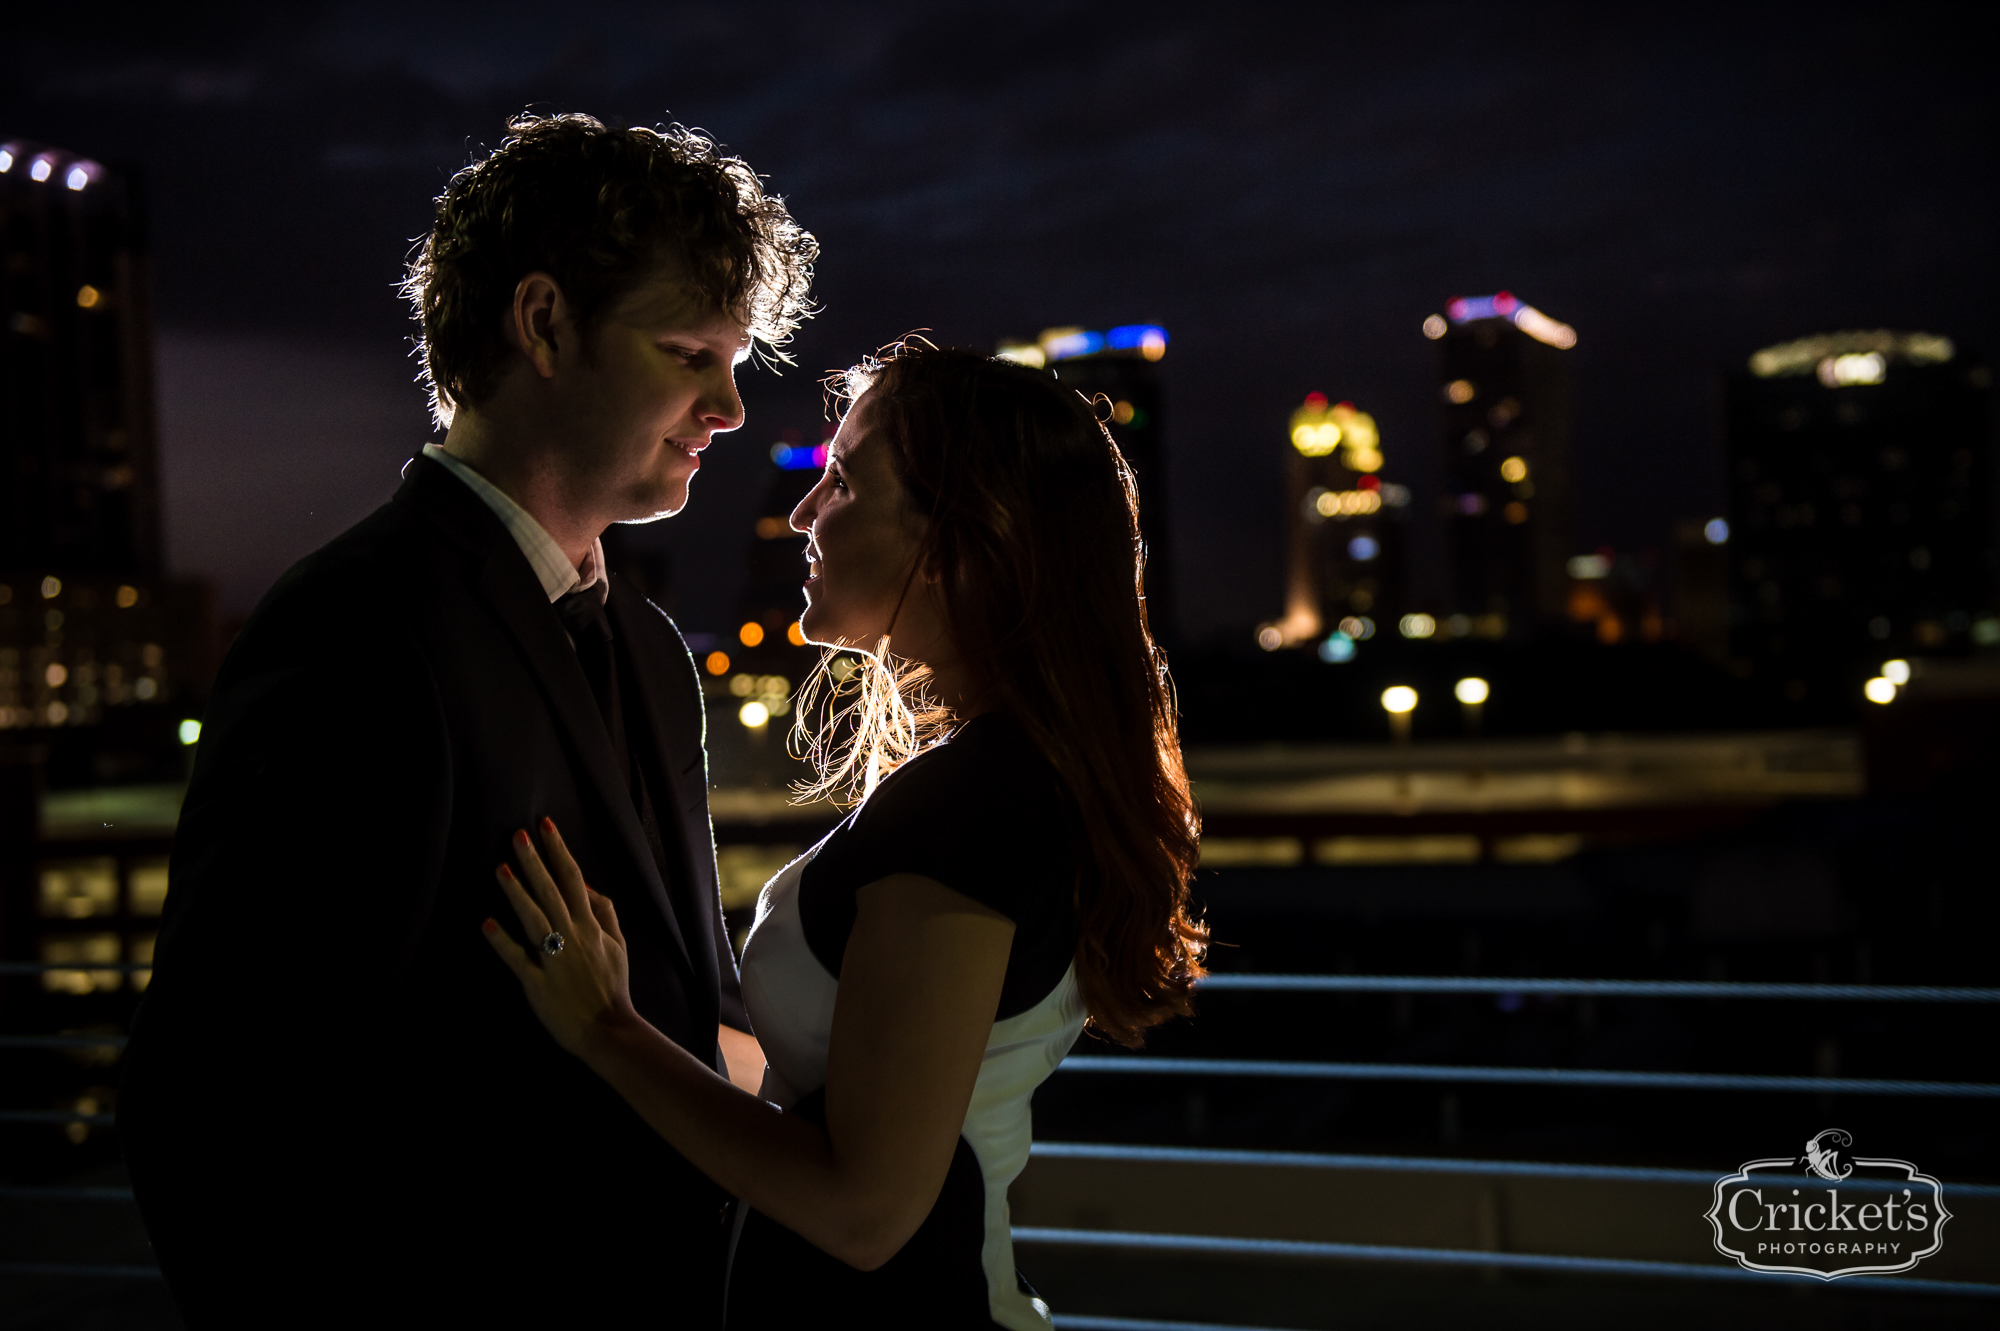 downtown Orlando engagement photography session